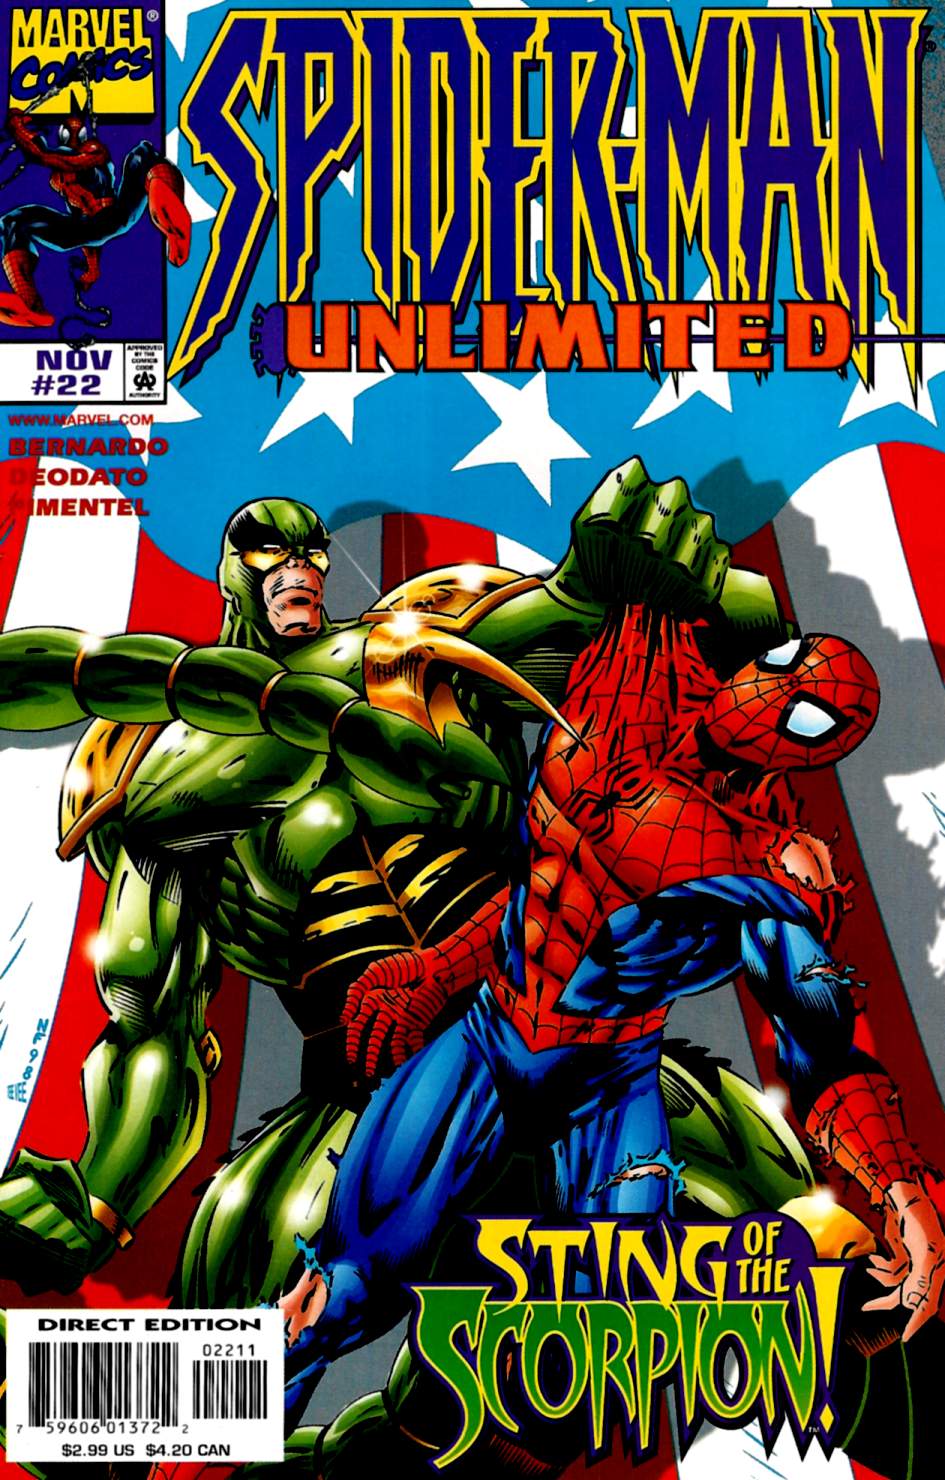 Spider-Man Unlimited #2-22 1993-1998 Marvel Comics Free Bag/Board Choice 